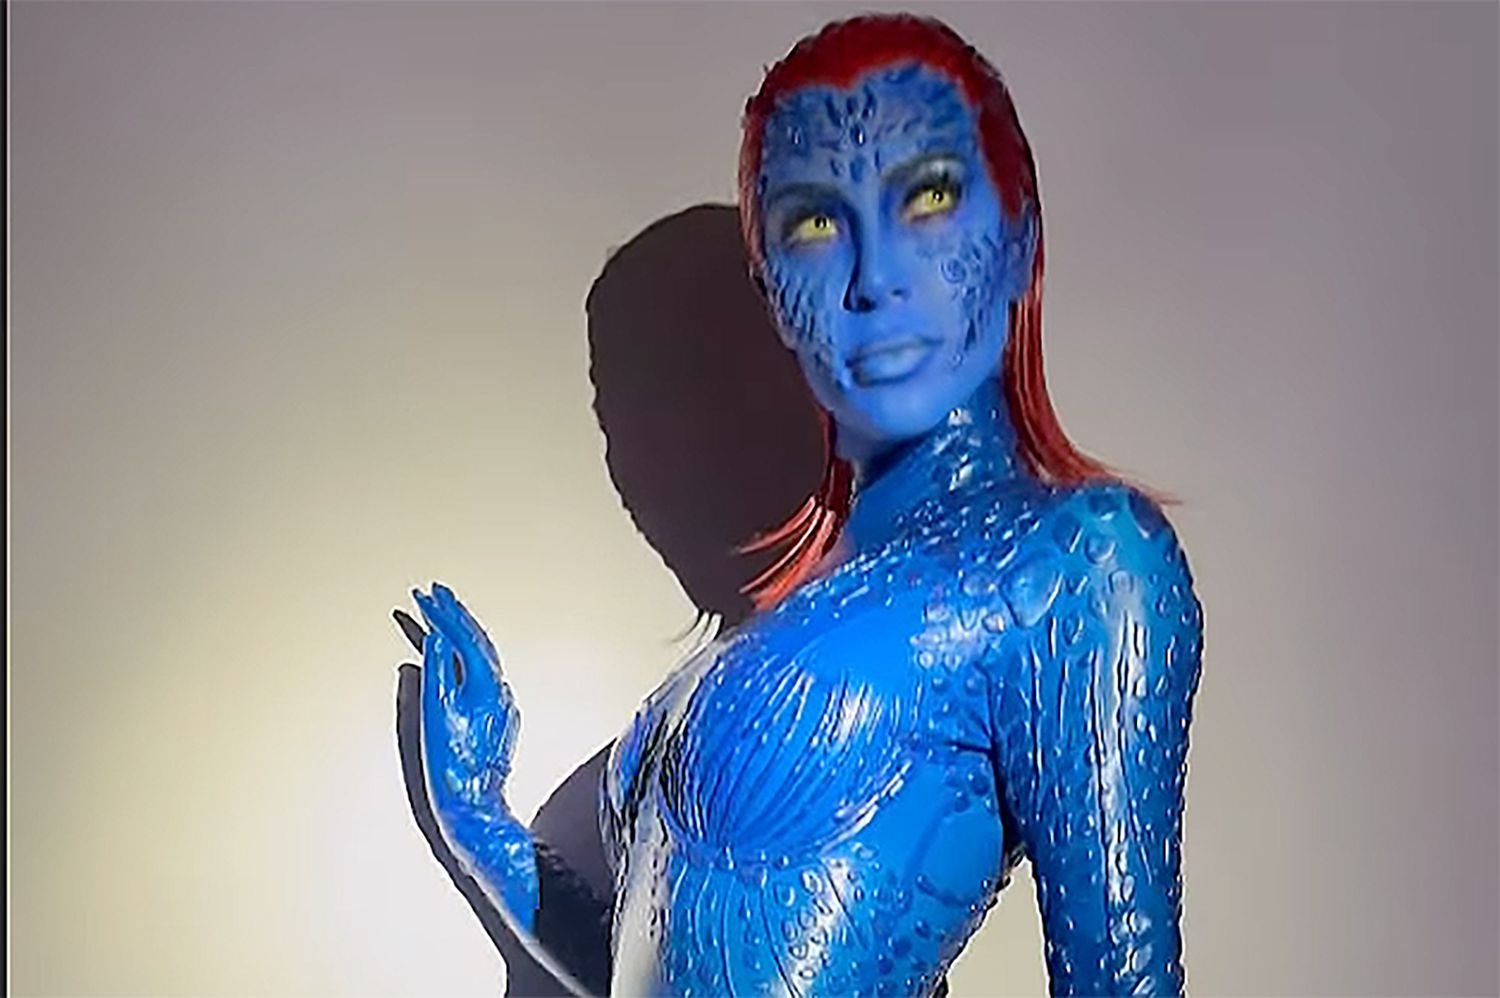 For Halloween, Kim Kardashian Donned the Enigmatic Mystique Outfit from the X-Men